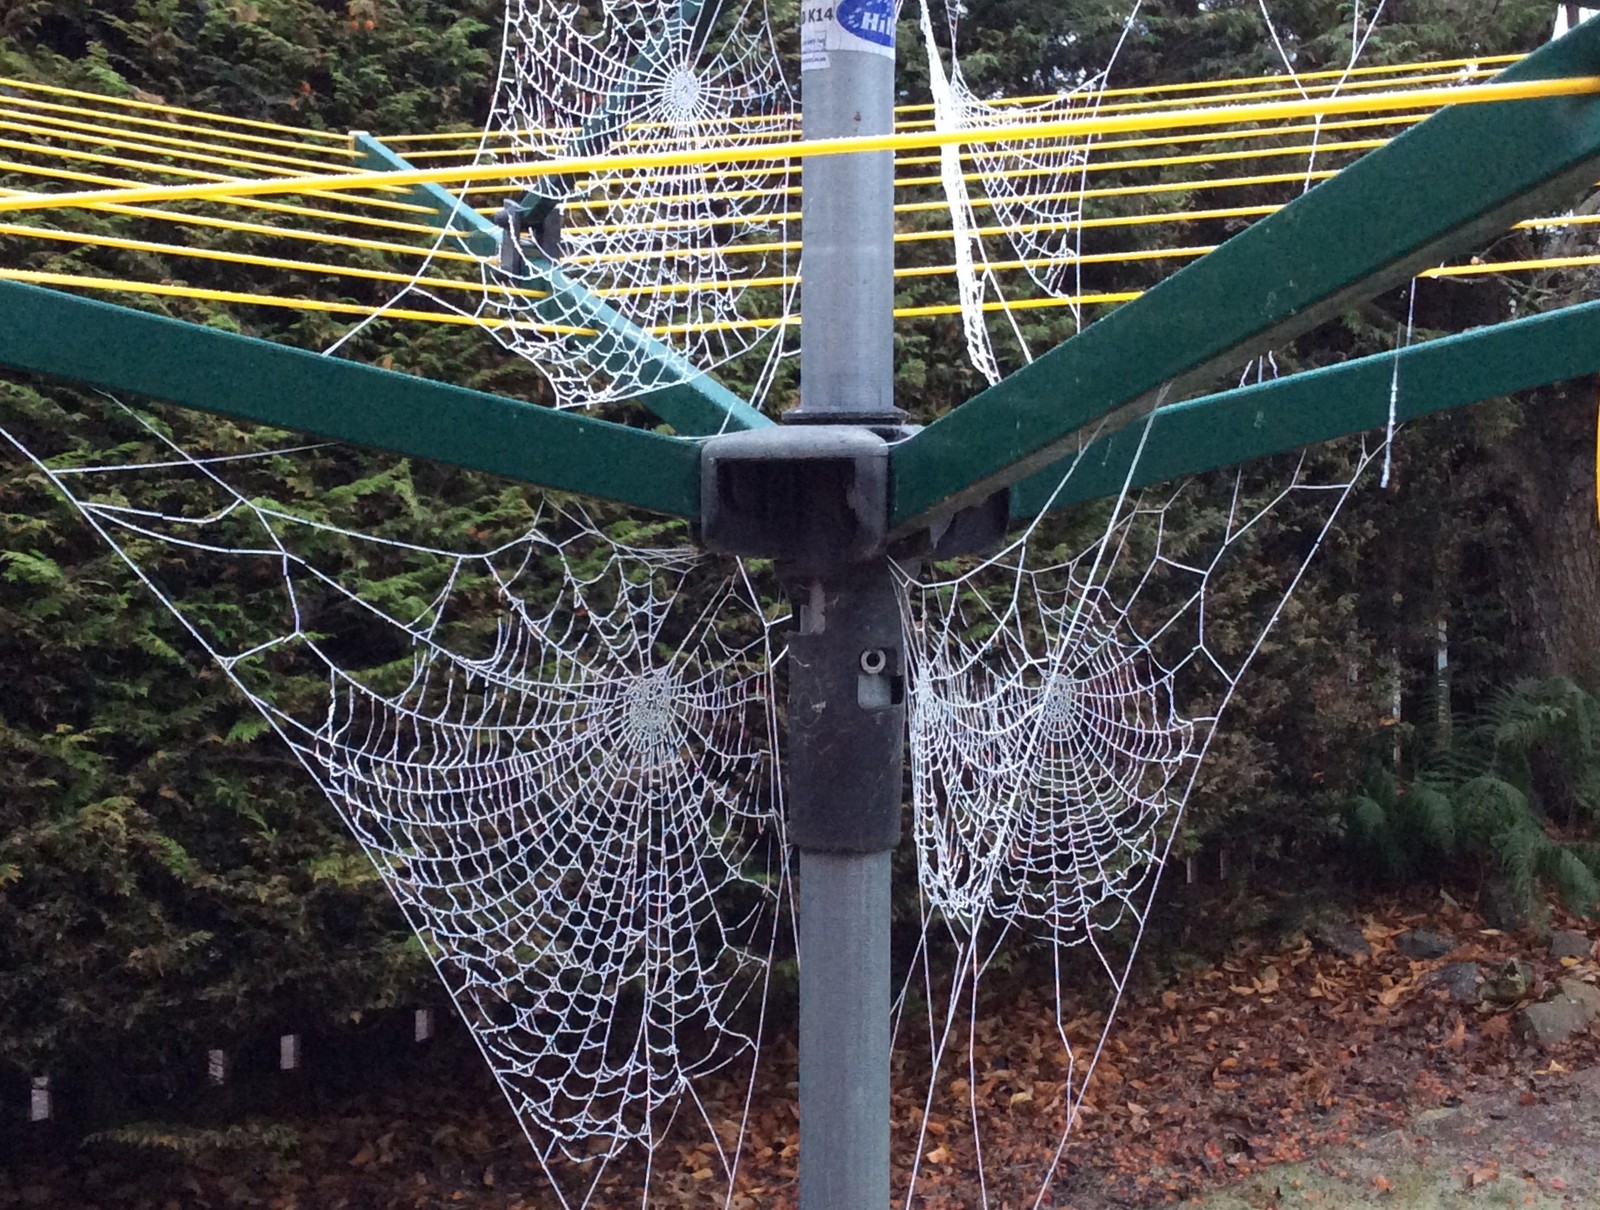 Frosty cobwebs cling to my rotary clothes line